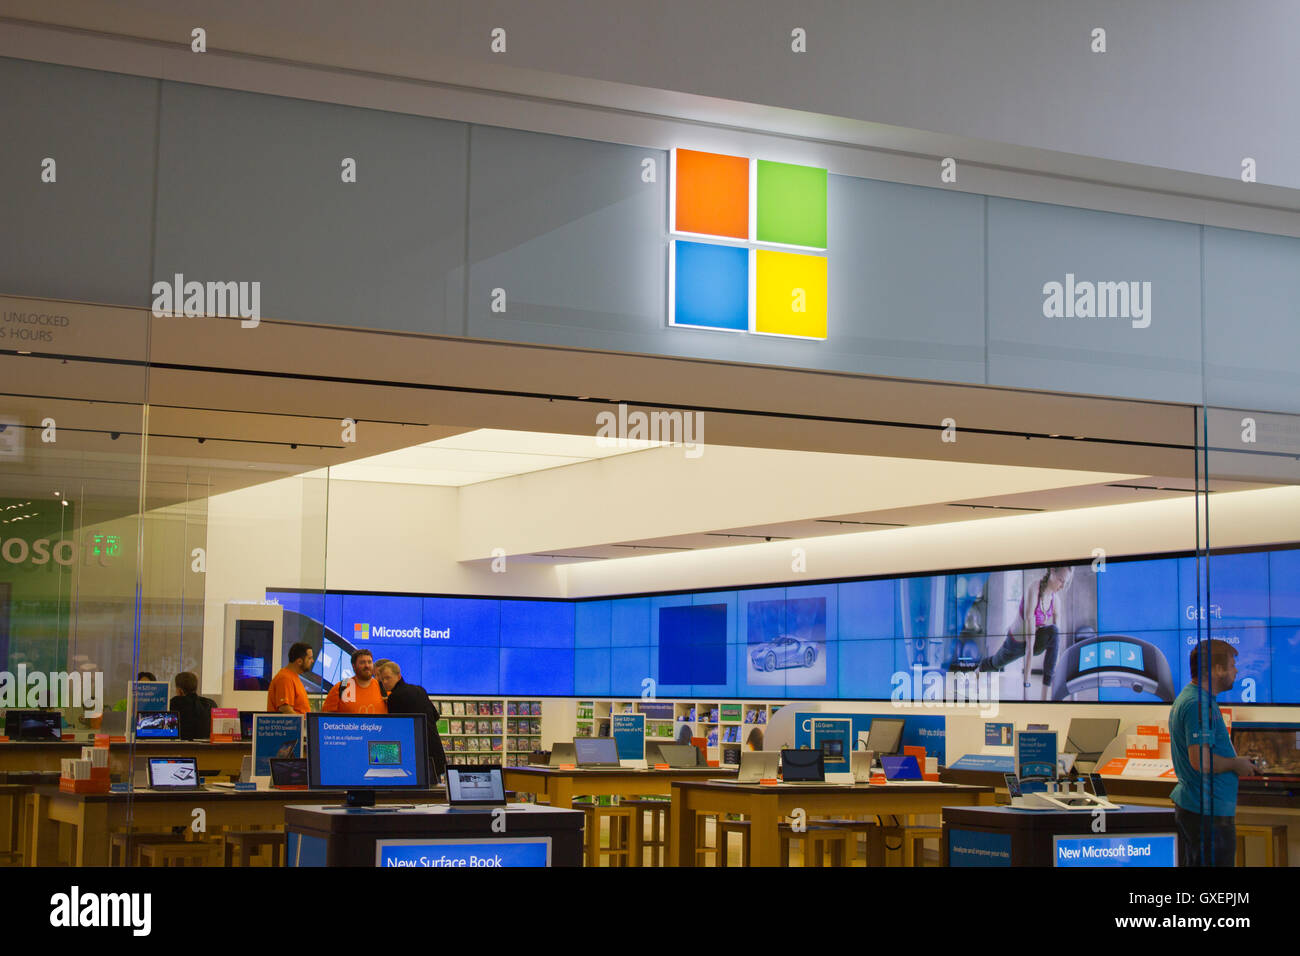 INDIANAPOLIS - CIRCA OCTOBER 2015: Microsoft Retail Technology Store in Indianapolis I Stock Photo